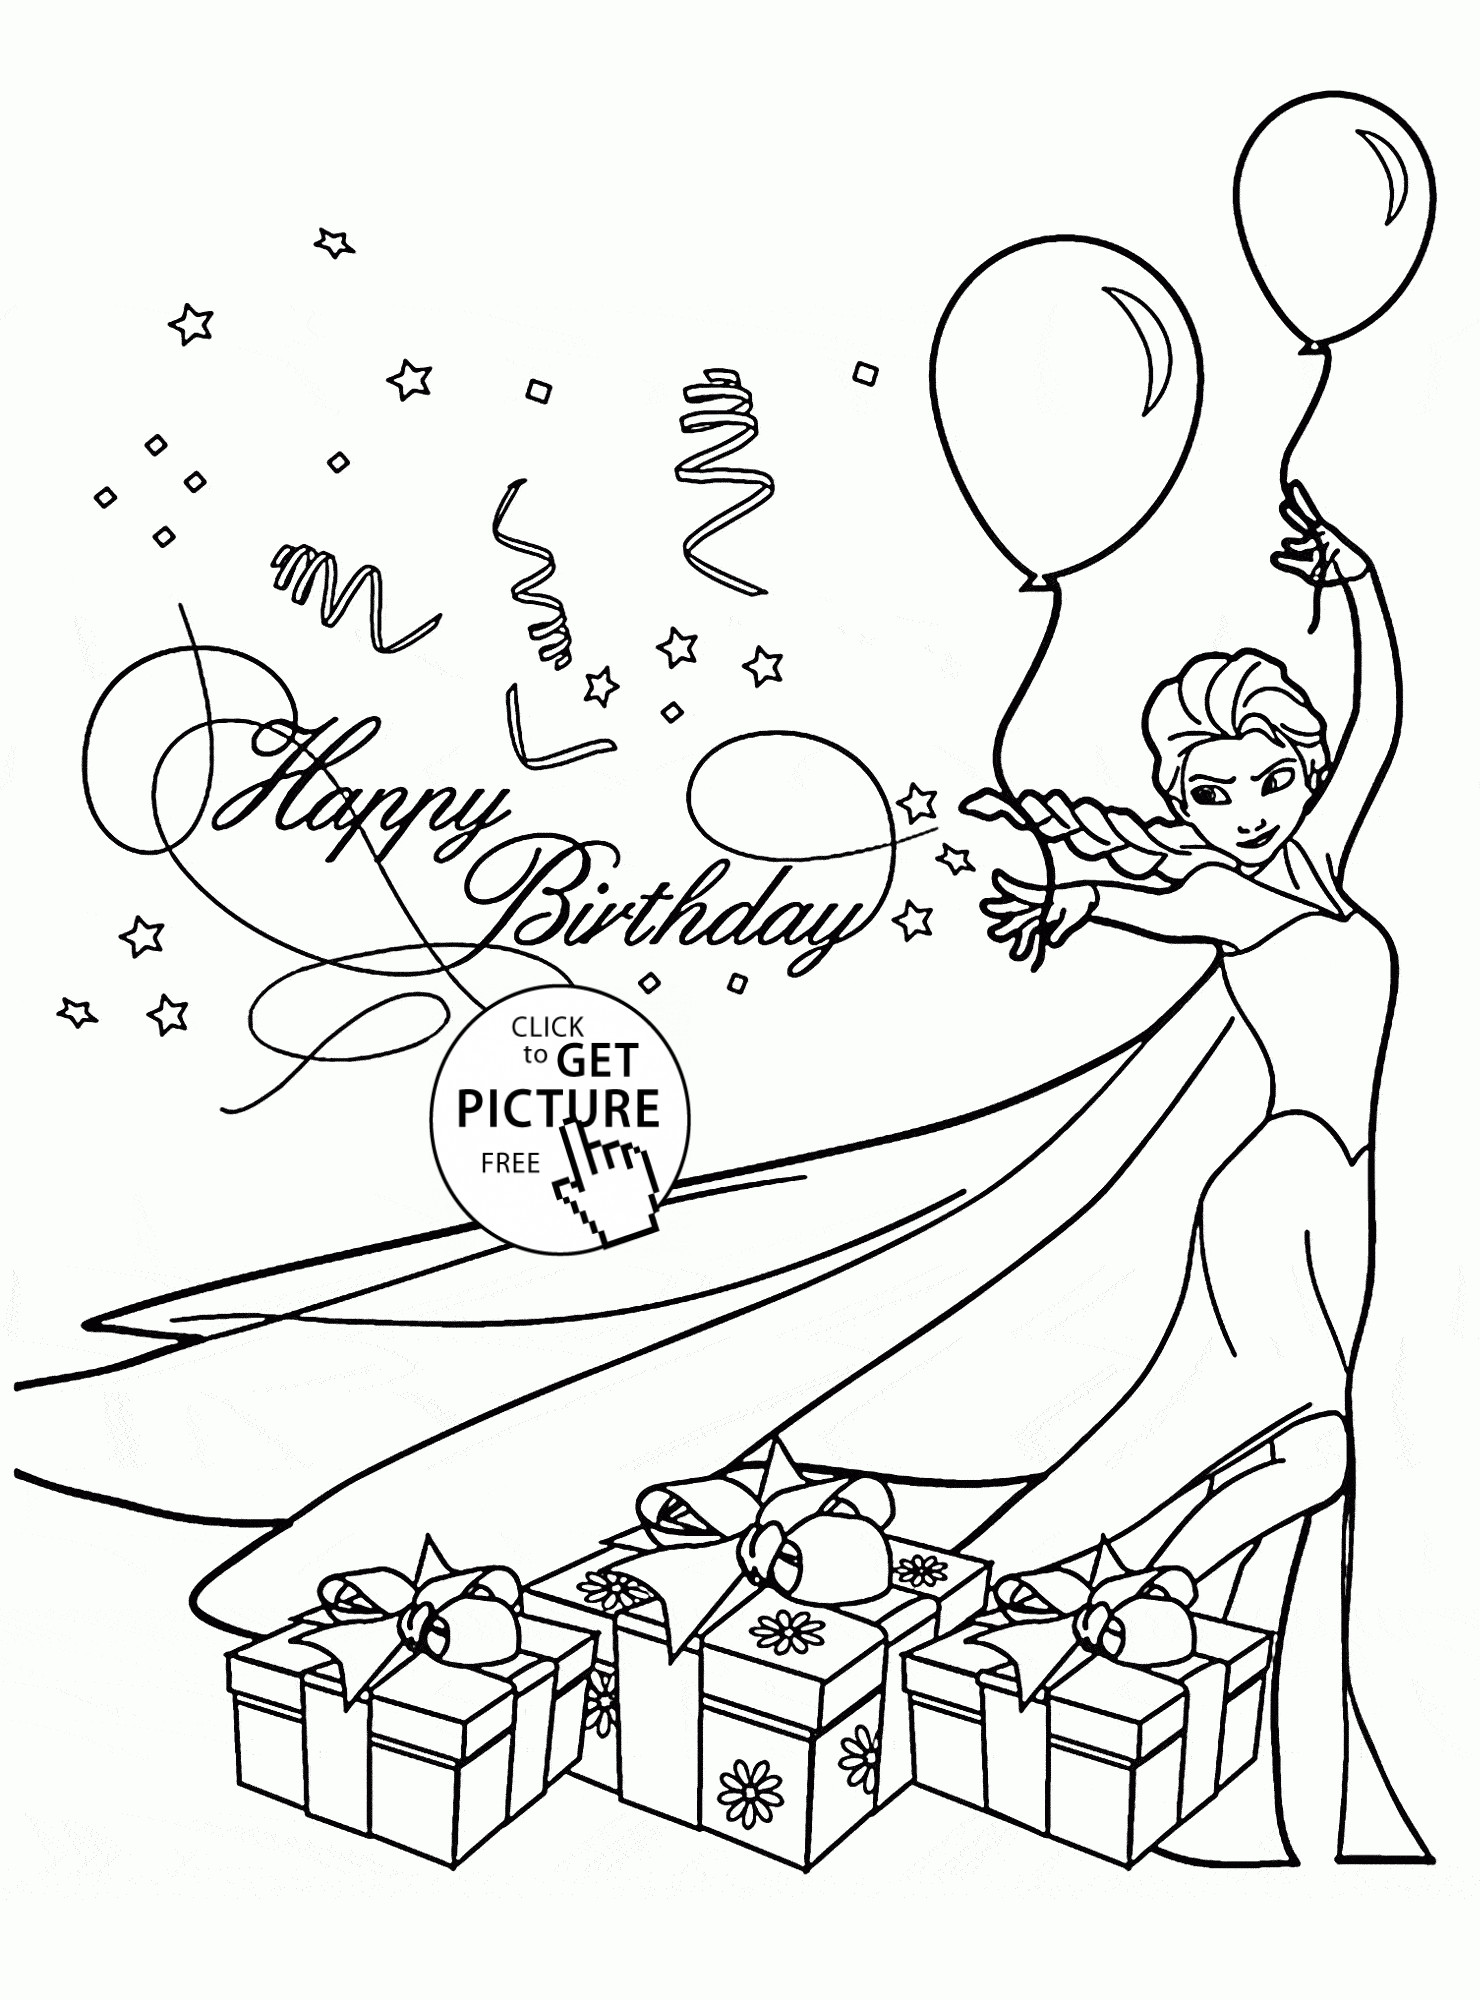 Printable Coloring Birthday Cards
 Birthday Cards Ideas Drawing at GetDrawings